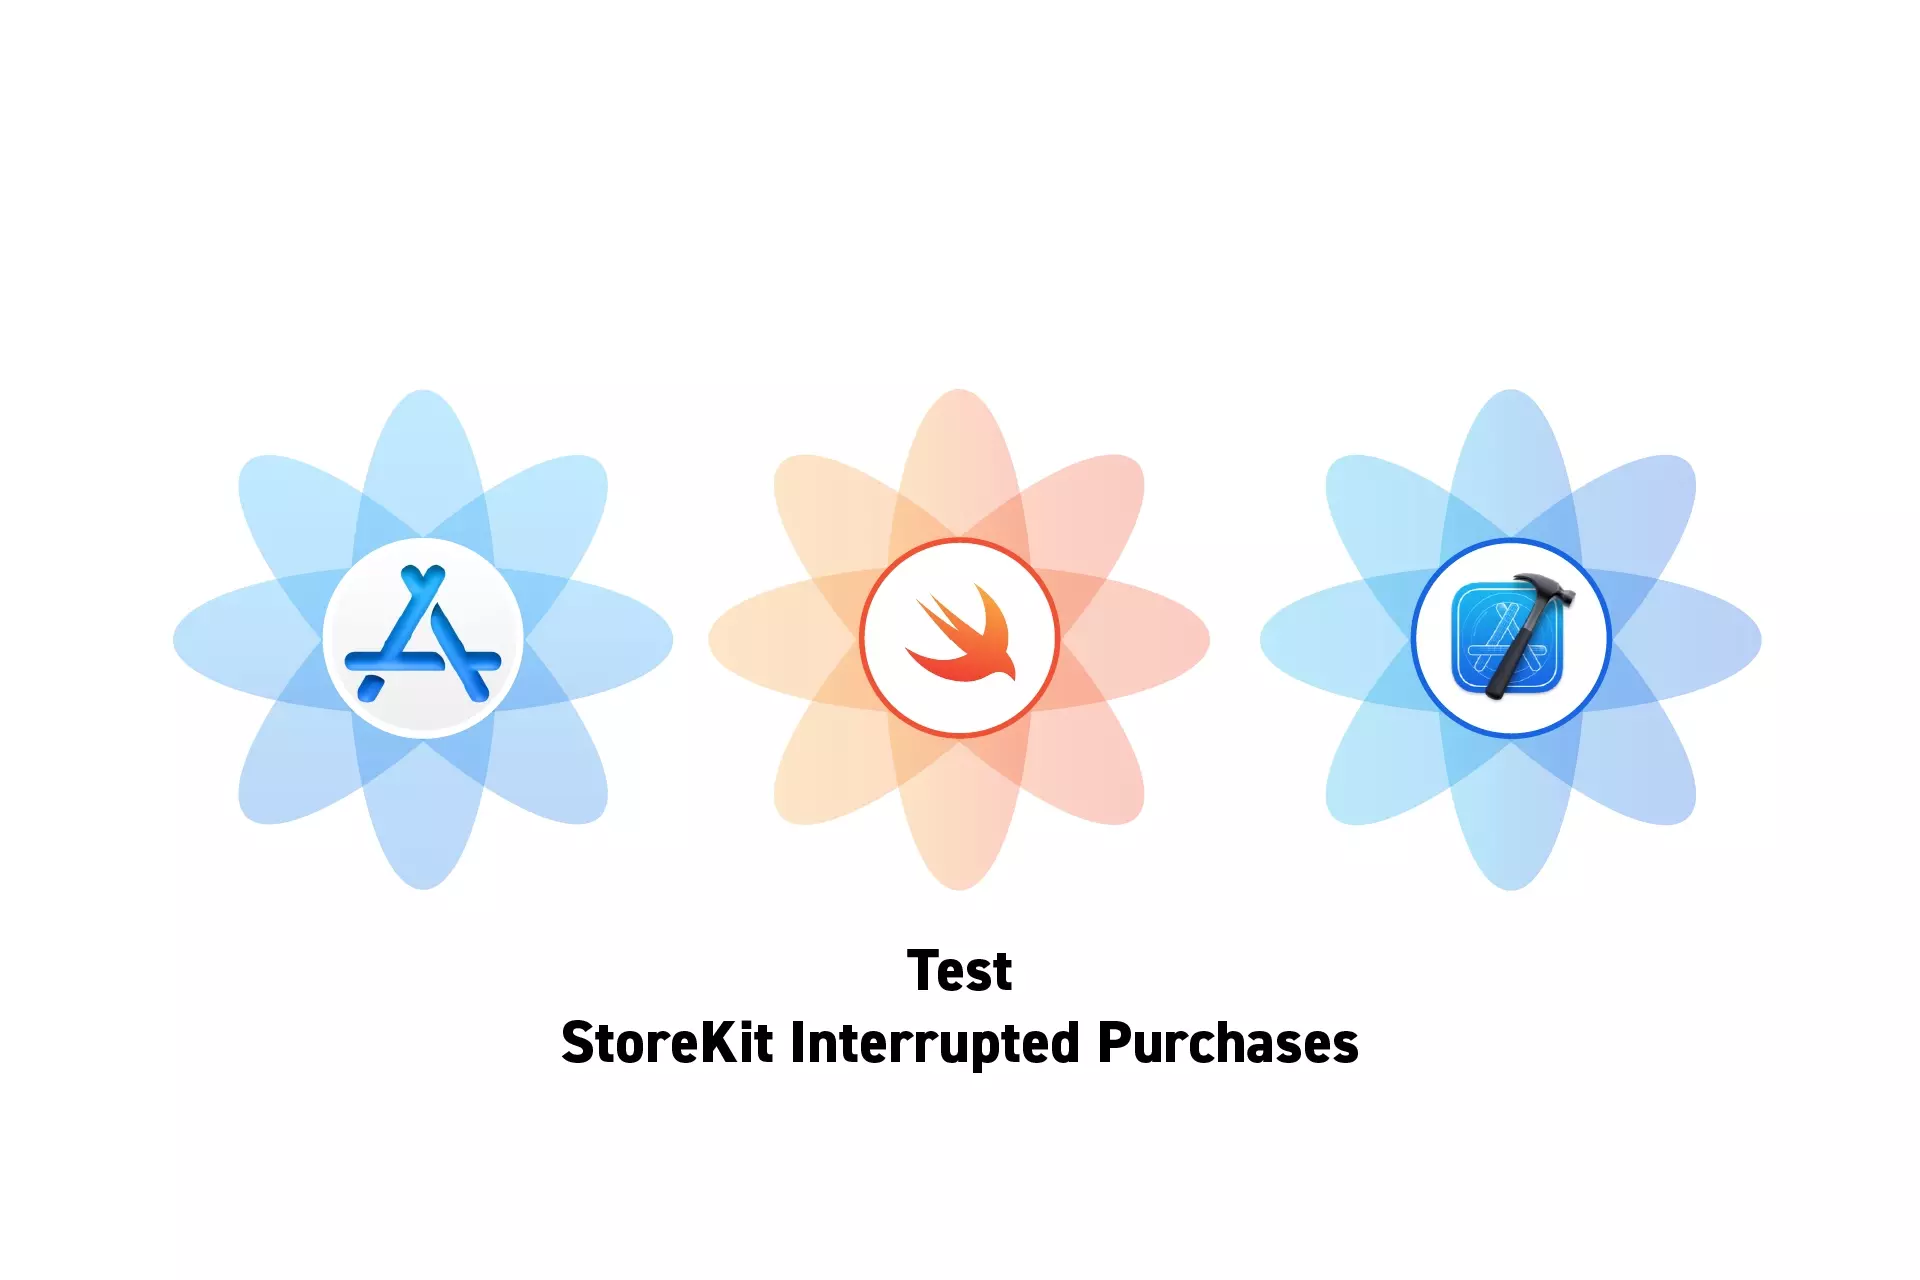 Three flowers that represent StoreKit, Swift and XCode side by side. Beneath them sits the text “Test StoreKit Interrupted Purchases.”